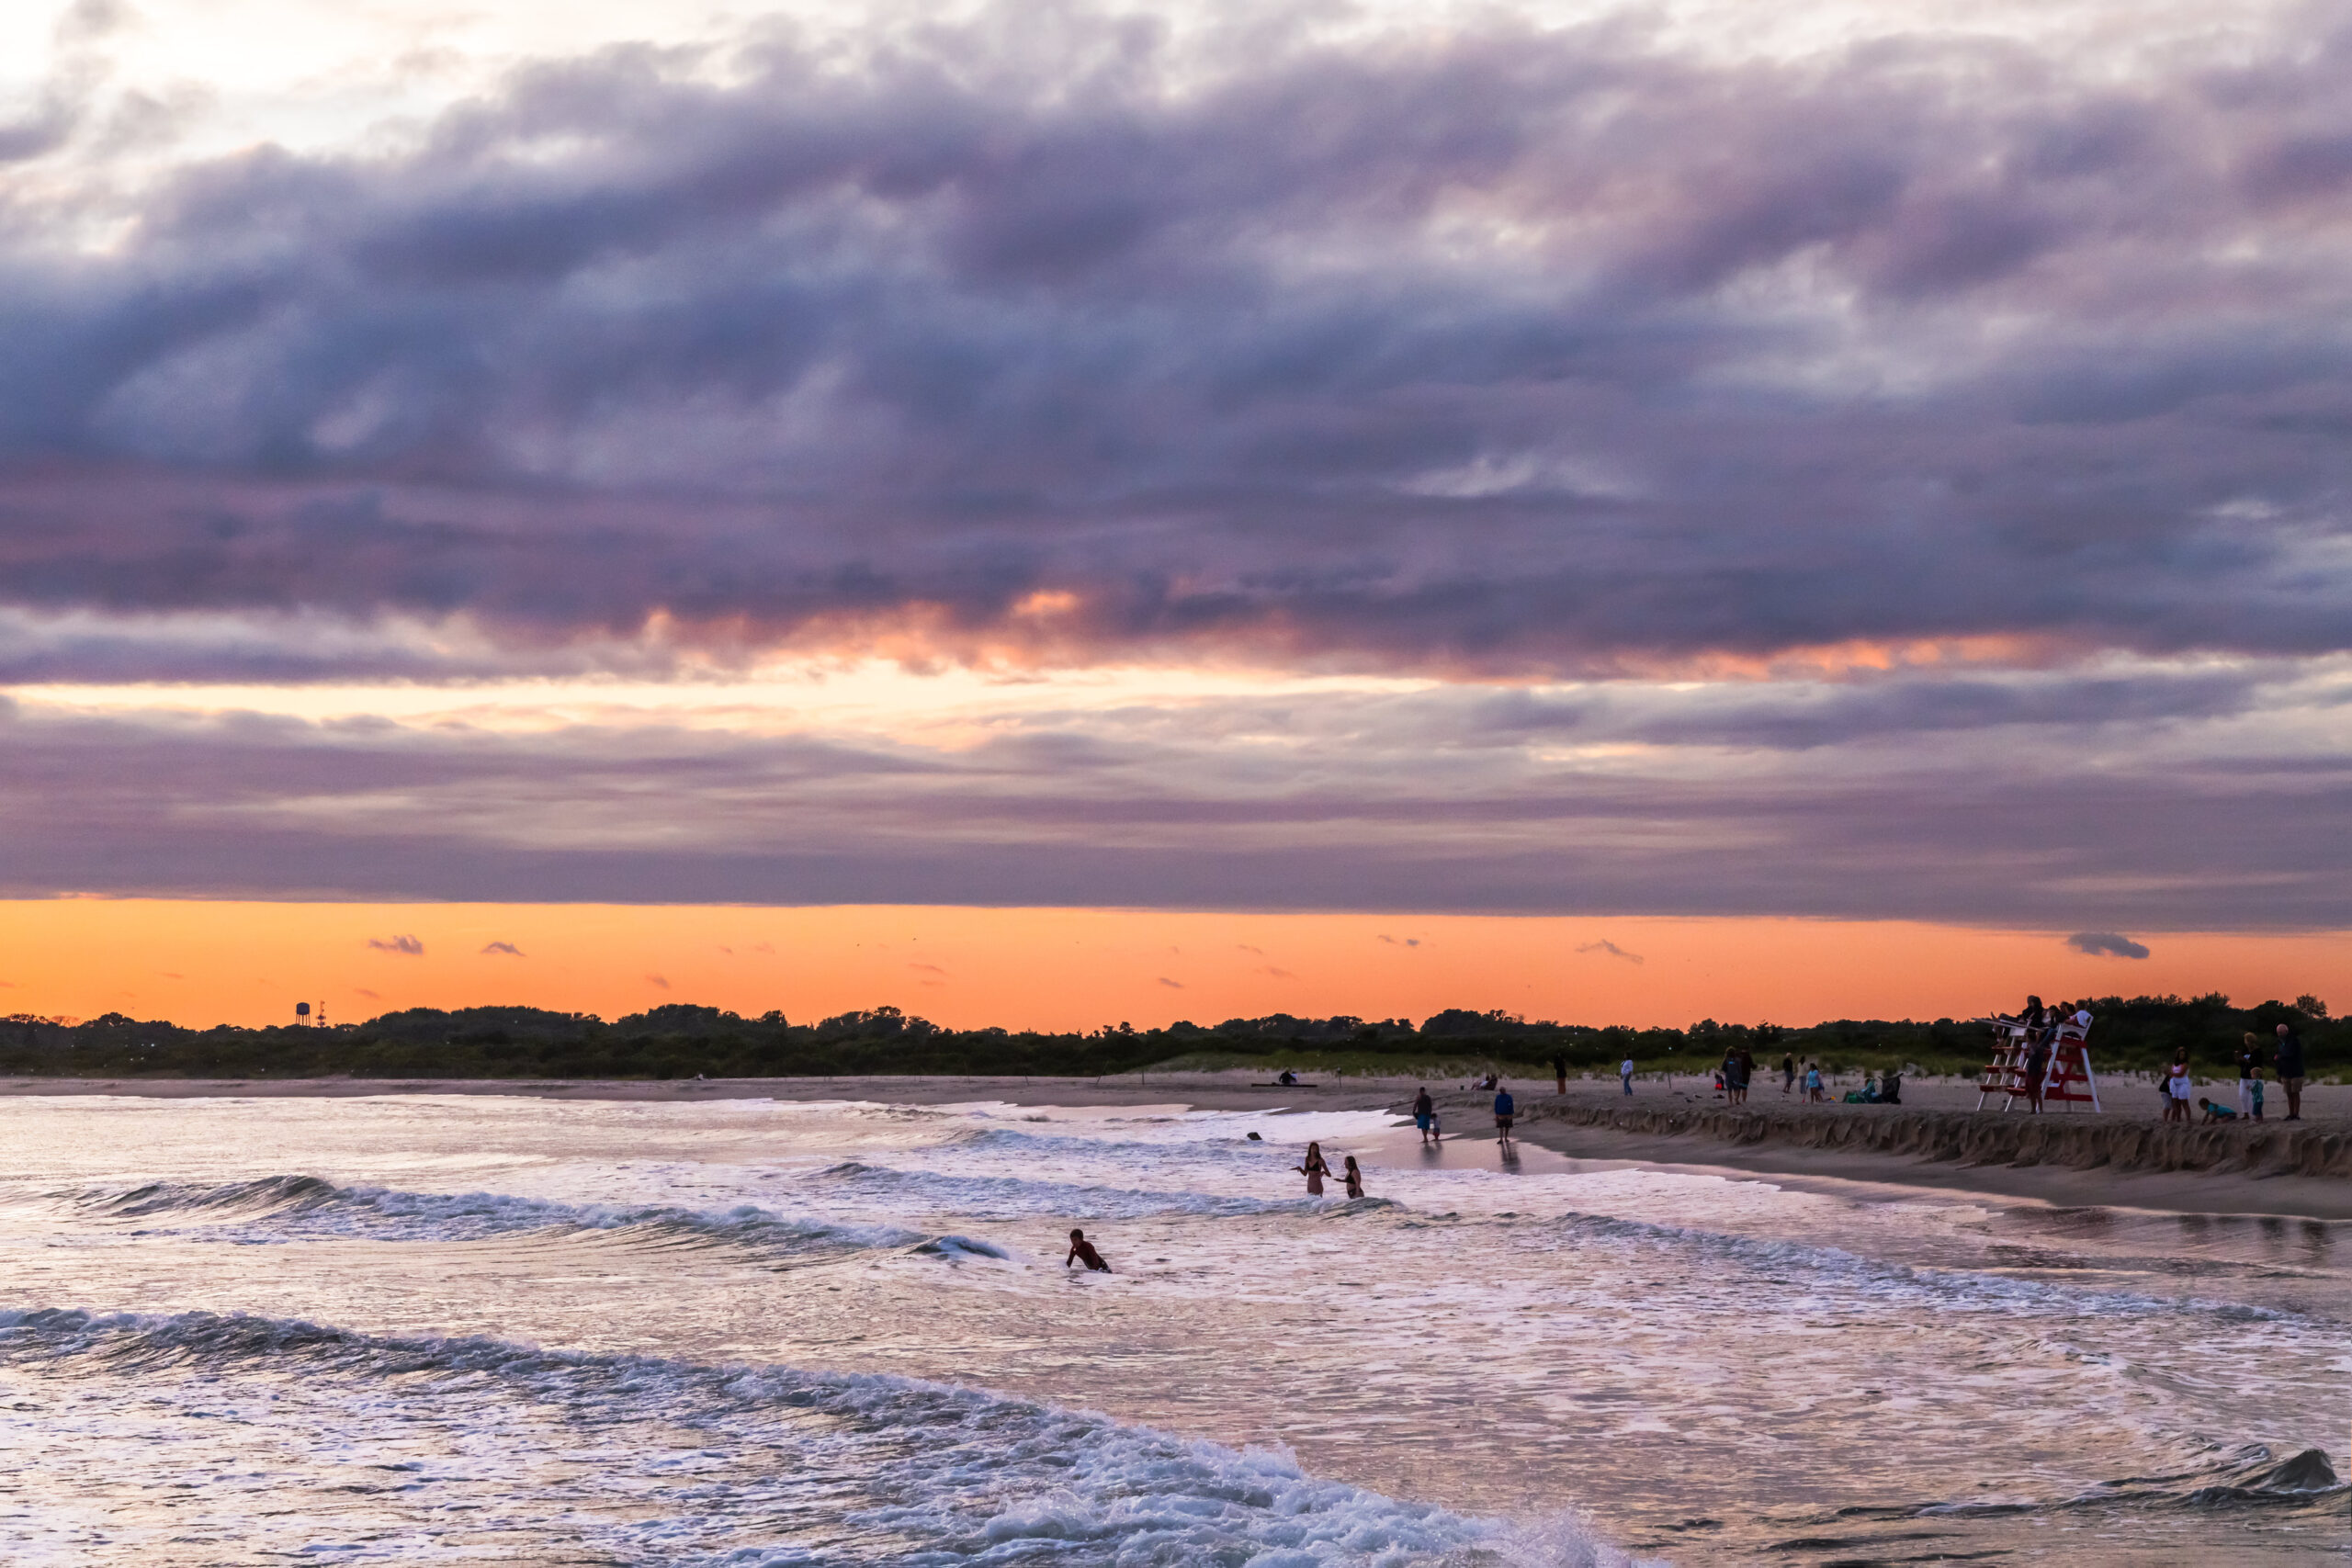 People going in the ocean and sitting on a lifeguard stand at sunset with purple and pink clouds in the sky